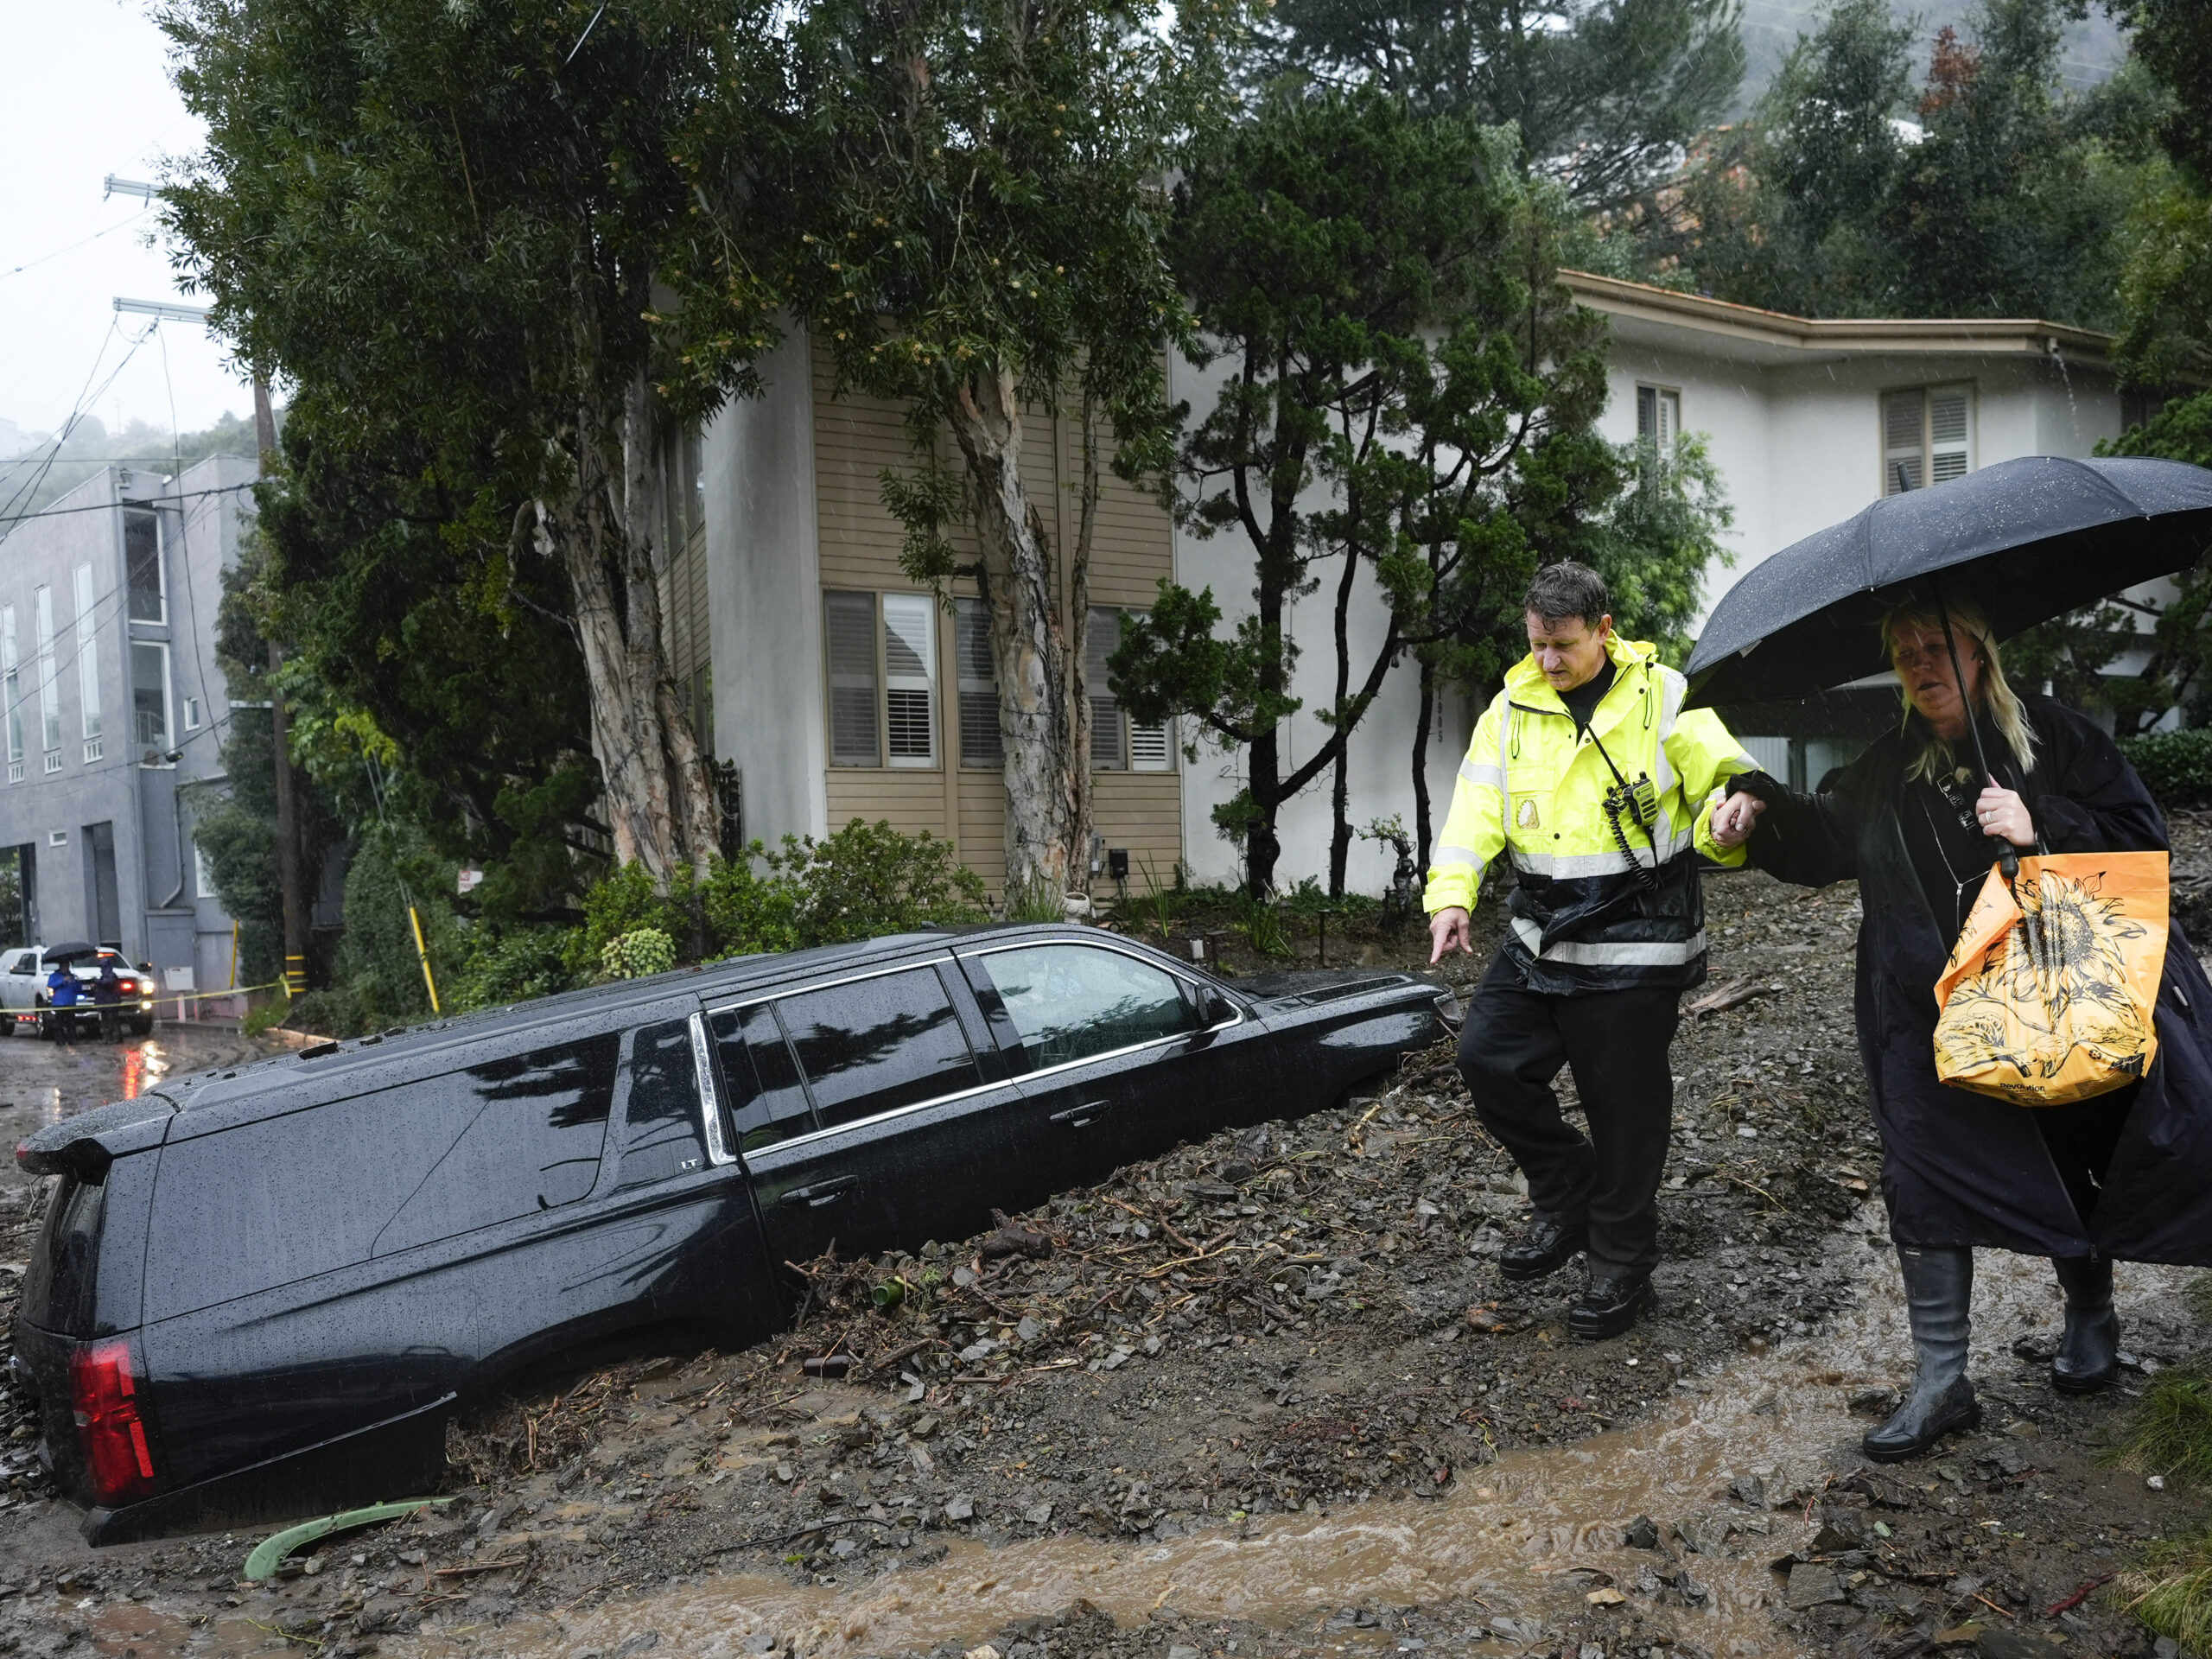 Record-setting rainfall in California claims 3 lives and leaves homes in peril